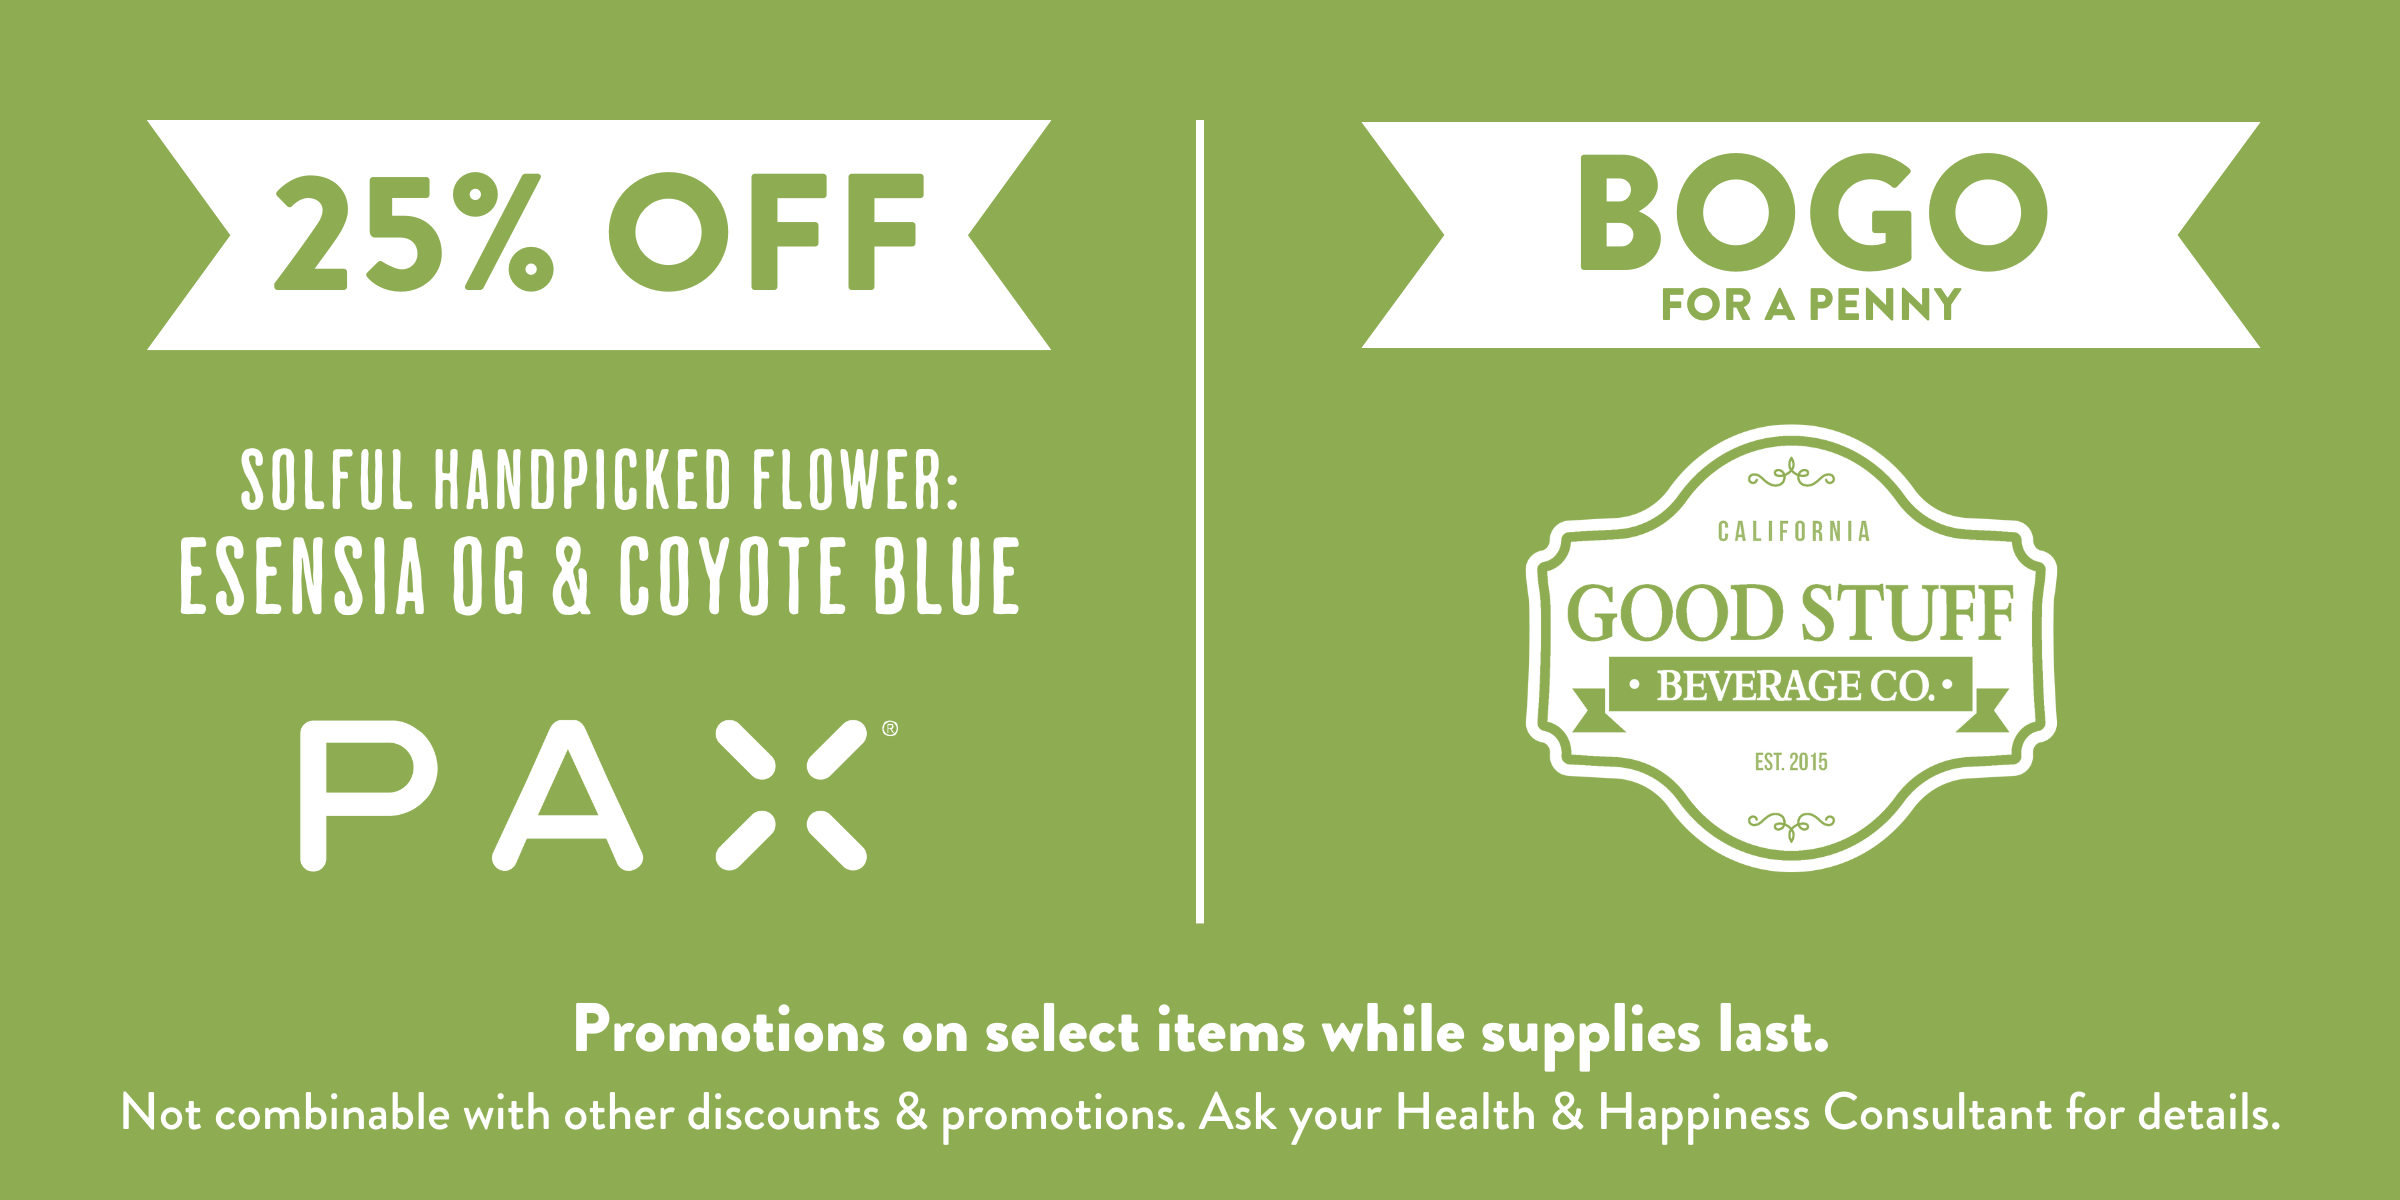 25% off PAX and Select Solful Handpicked flower: Esensia OG and Coyote Blue. BOGO $0.01 Good Stuff Beverages. Ask your health and happiness consultant for more details. Available while supplies last.